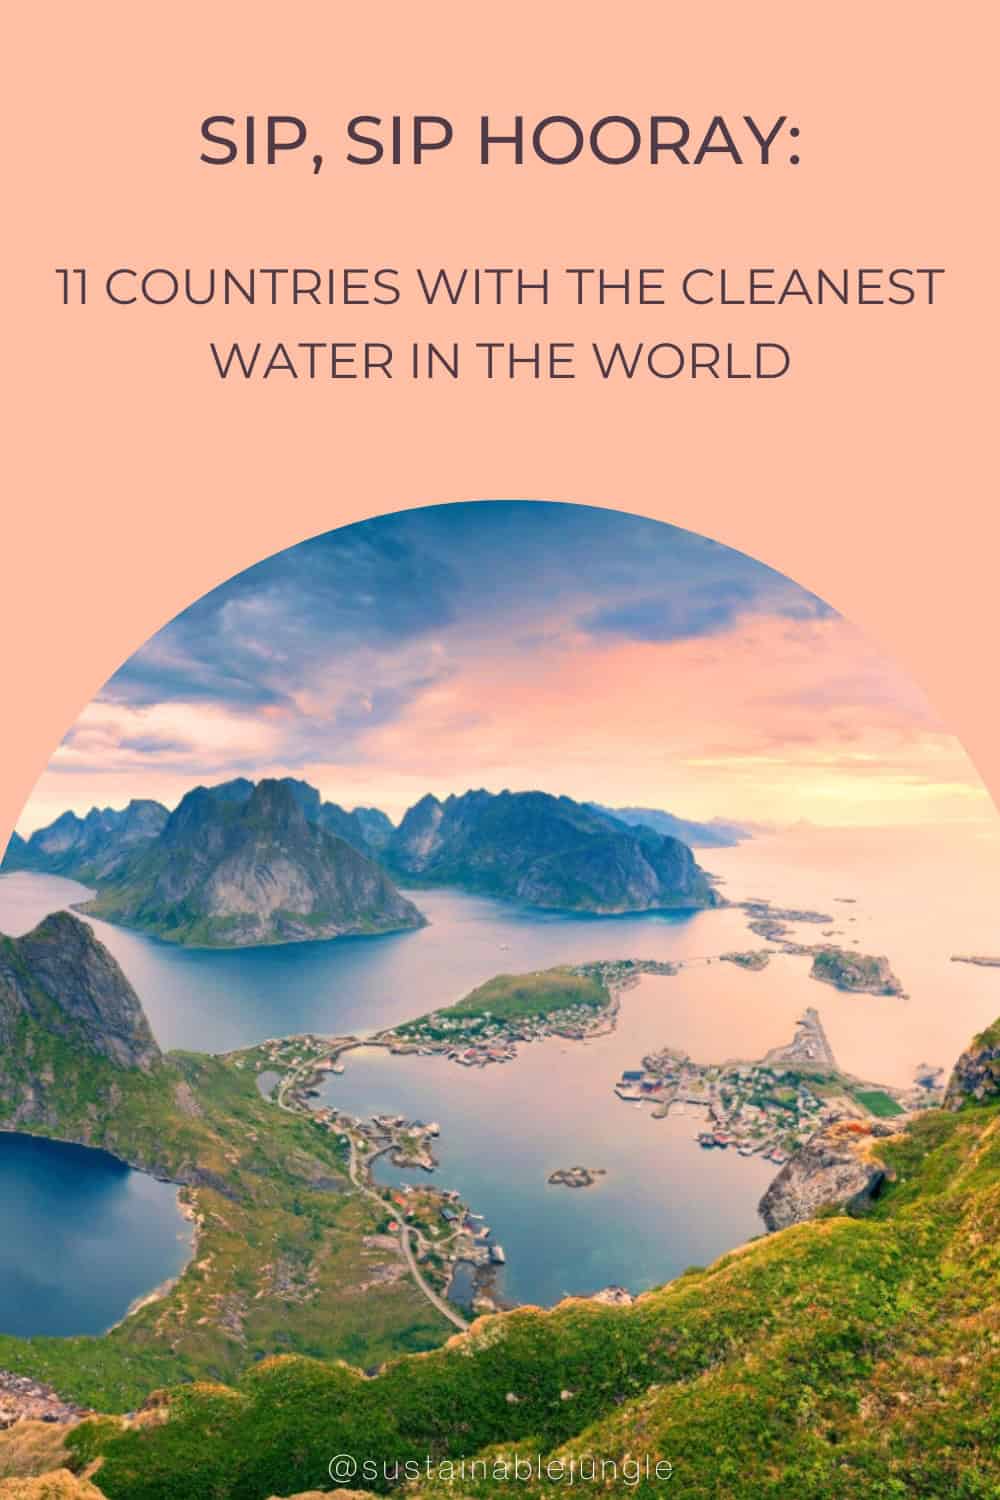 Sip, Sip Hooray: 11 Countries With The Cleanest Water In The World Image by RudyBalasko #cleanestwaterintheworld #bestwaterintheworld #cleanestdrinkingwaterintheworld #countrieswiththecleanestwater #purestwaterintheworld #sustainablejungle